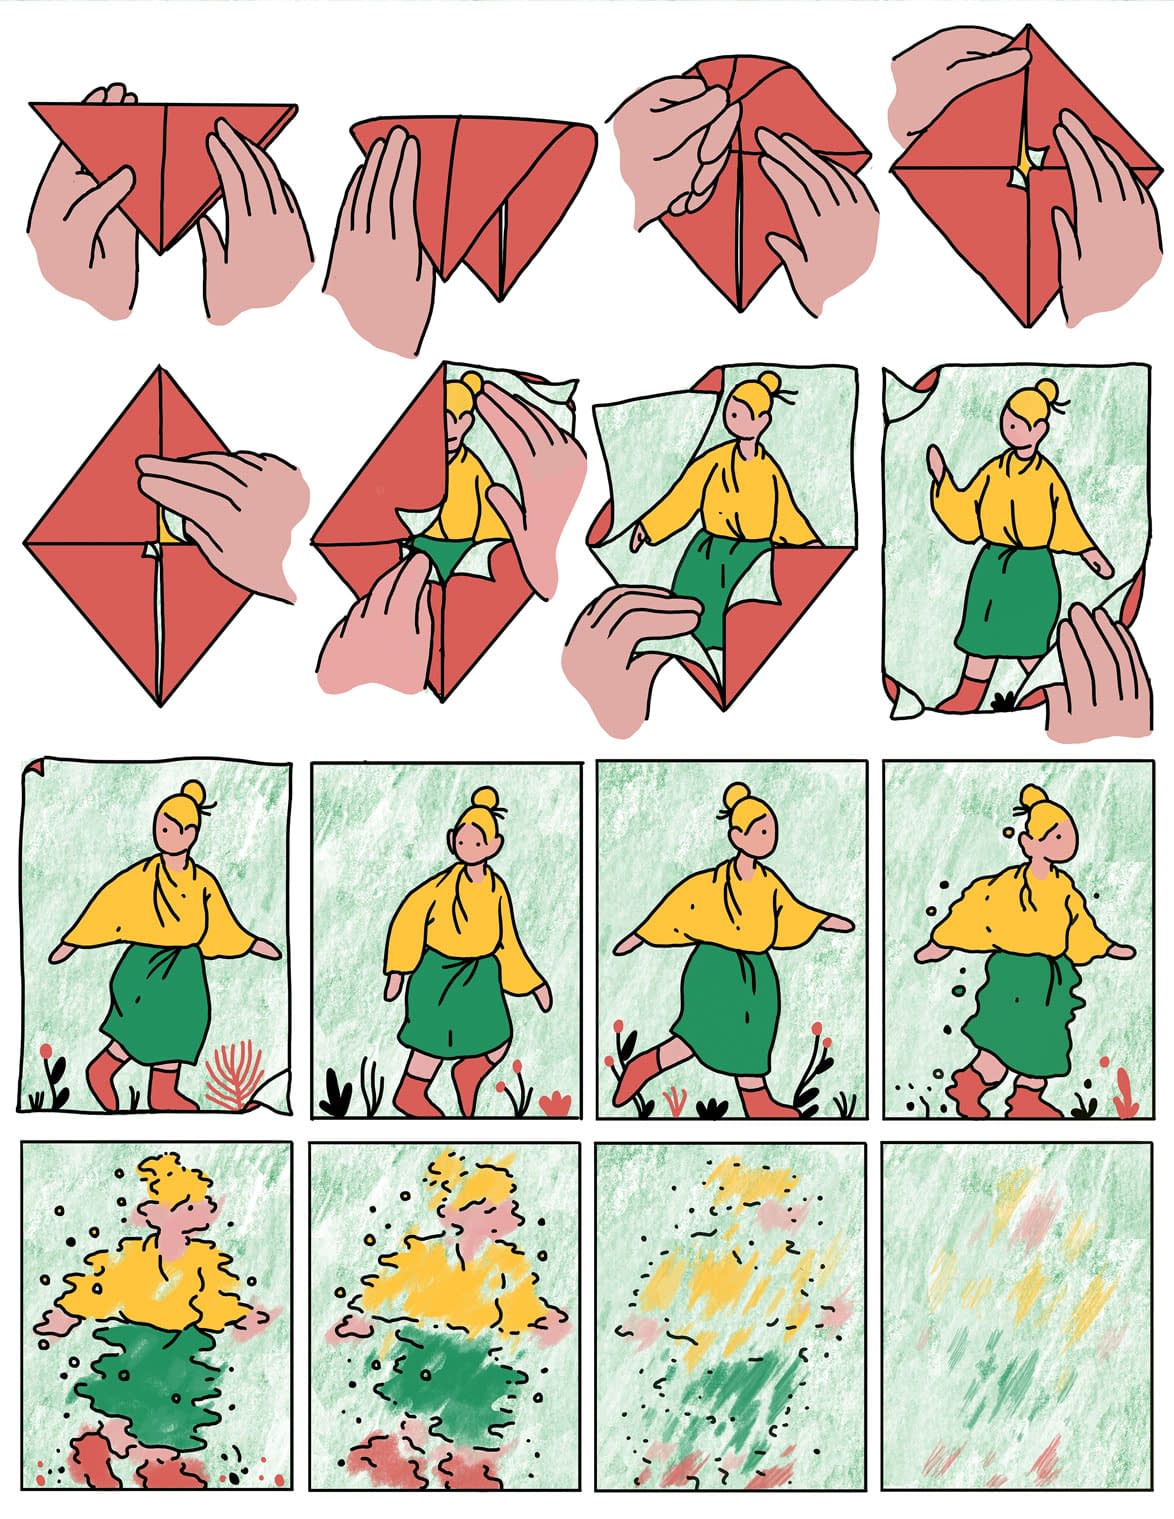 silent, poetic comic about creativity in which a woman is folded into origami and disappears 